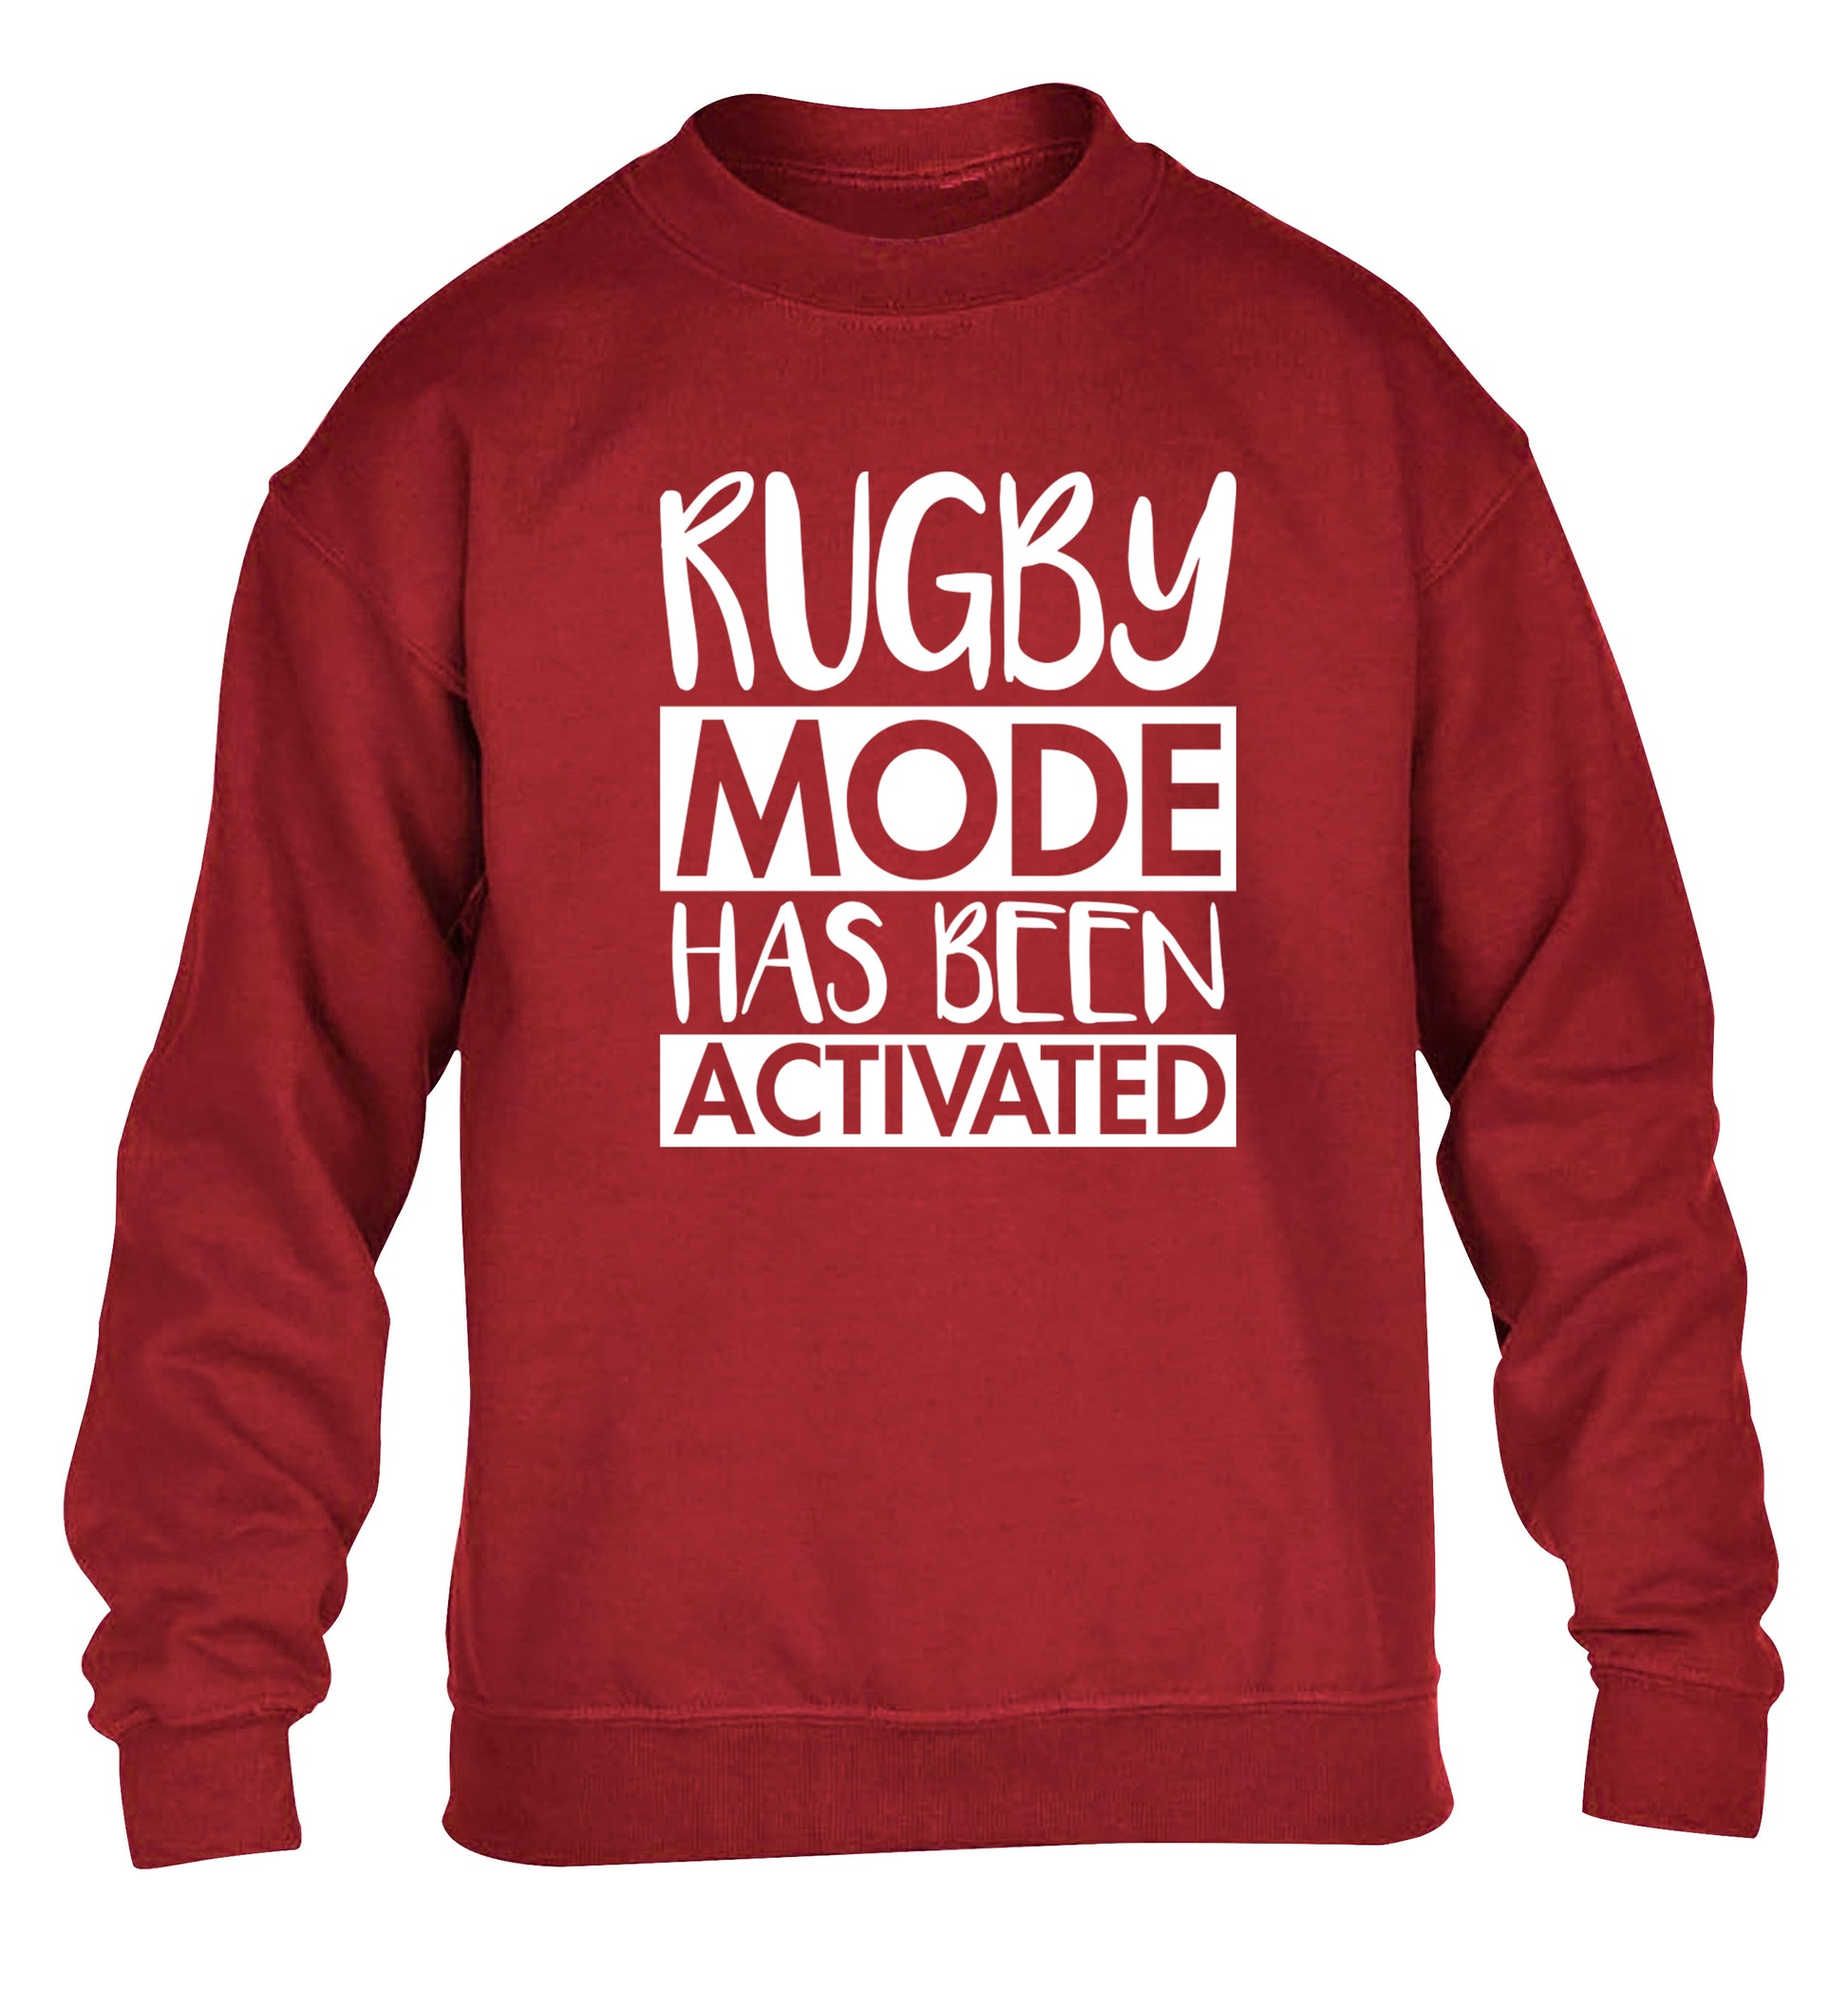 Rugby mode activated children's grey sweater 12-13 Years